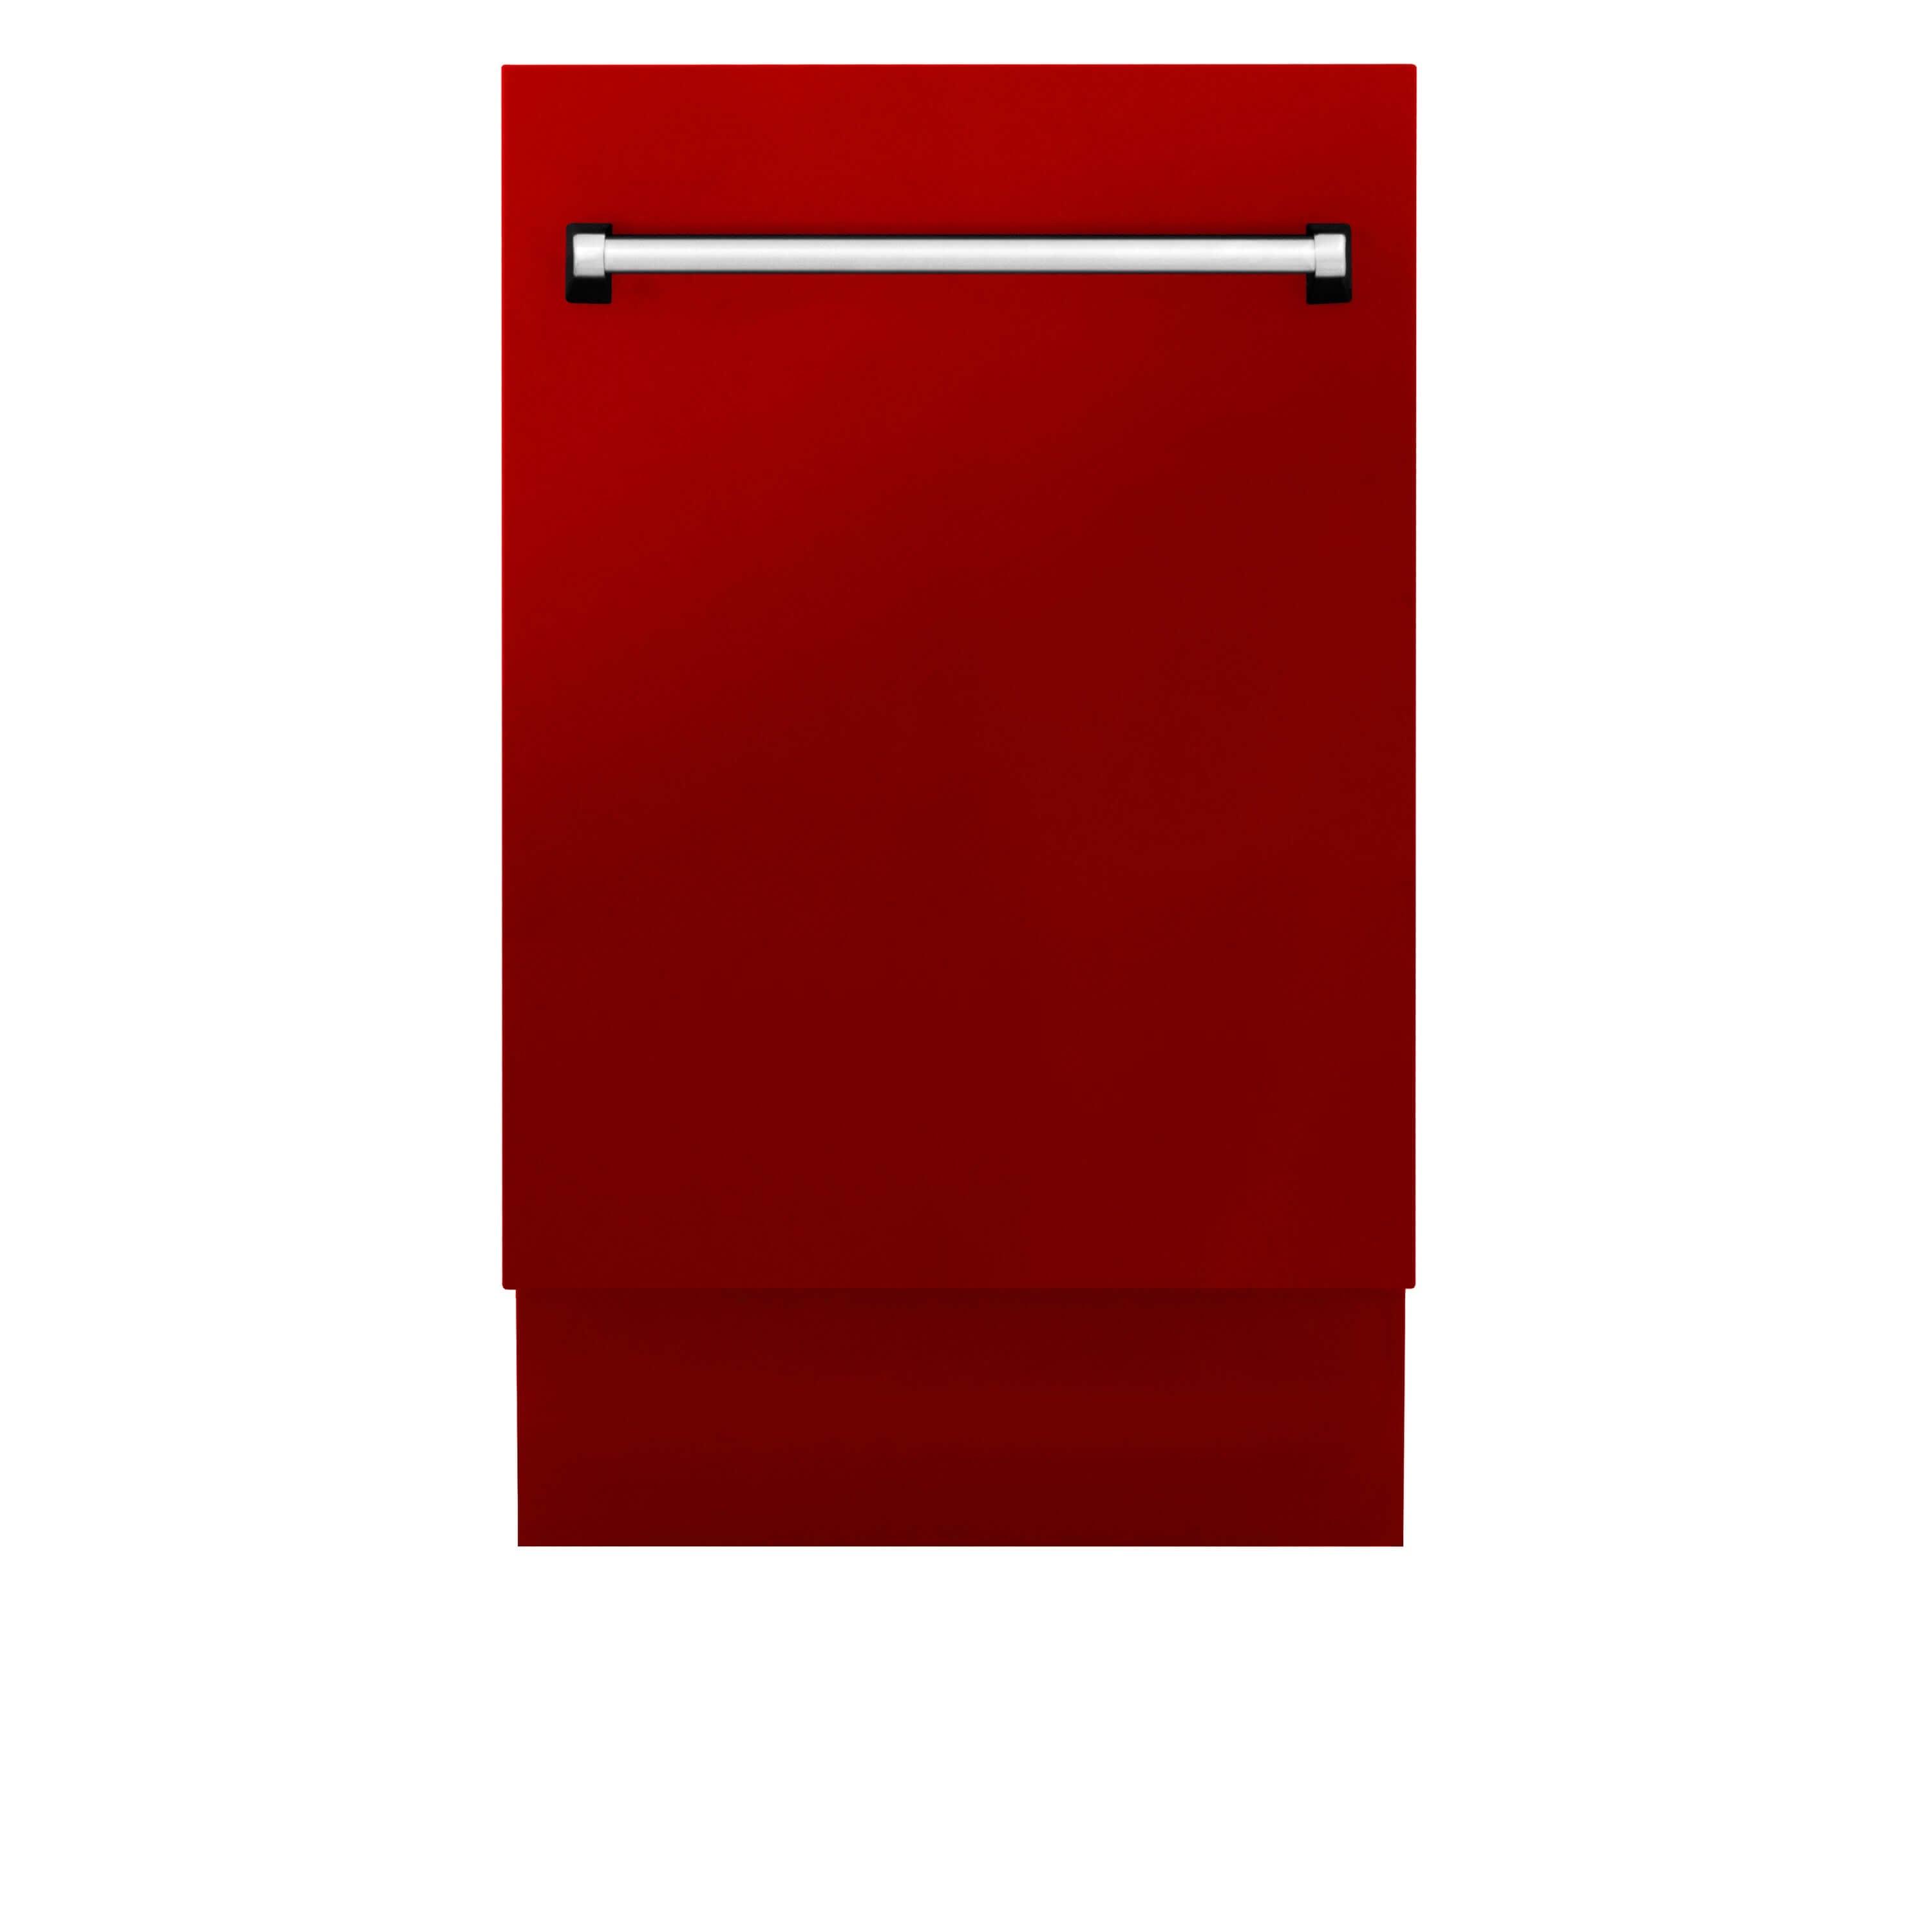 ZLINE 18 in. Tallac Series 3rd Rack Top Control Built-In Dishwasher in Red Gloss with Stainless Steel Tub, 51dBa (DWV-RG-18) front, closed.